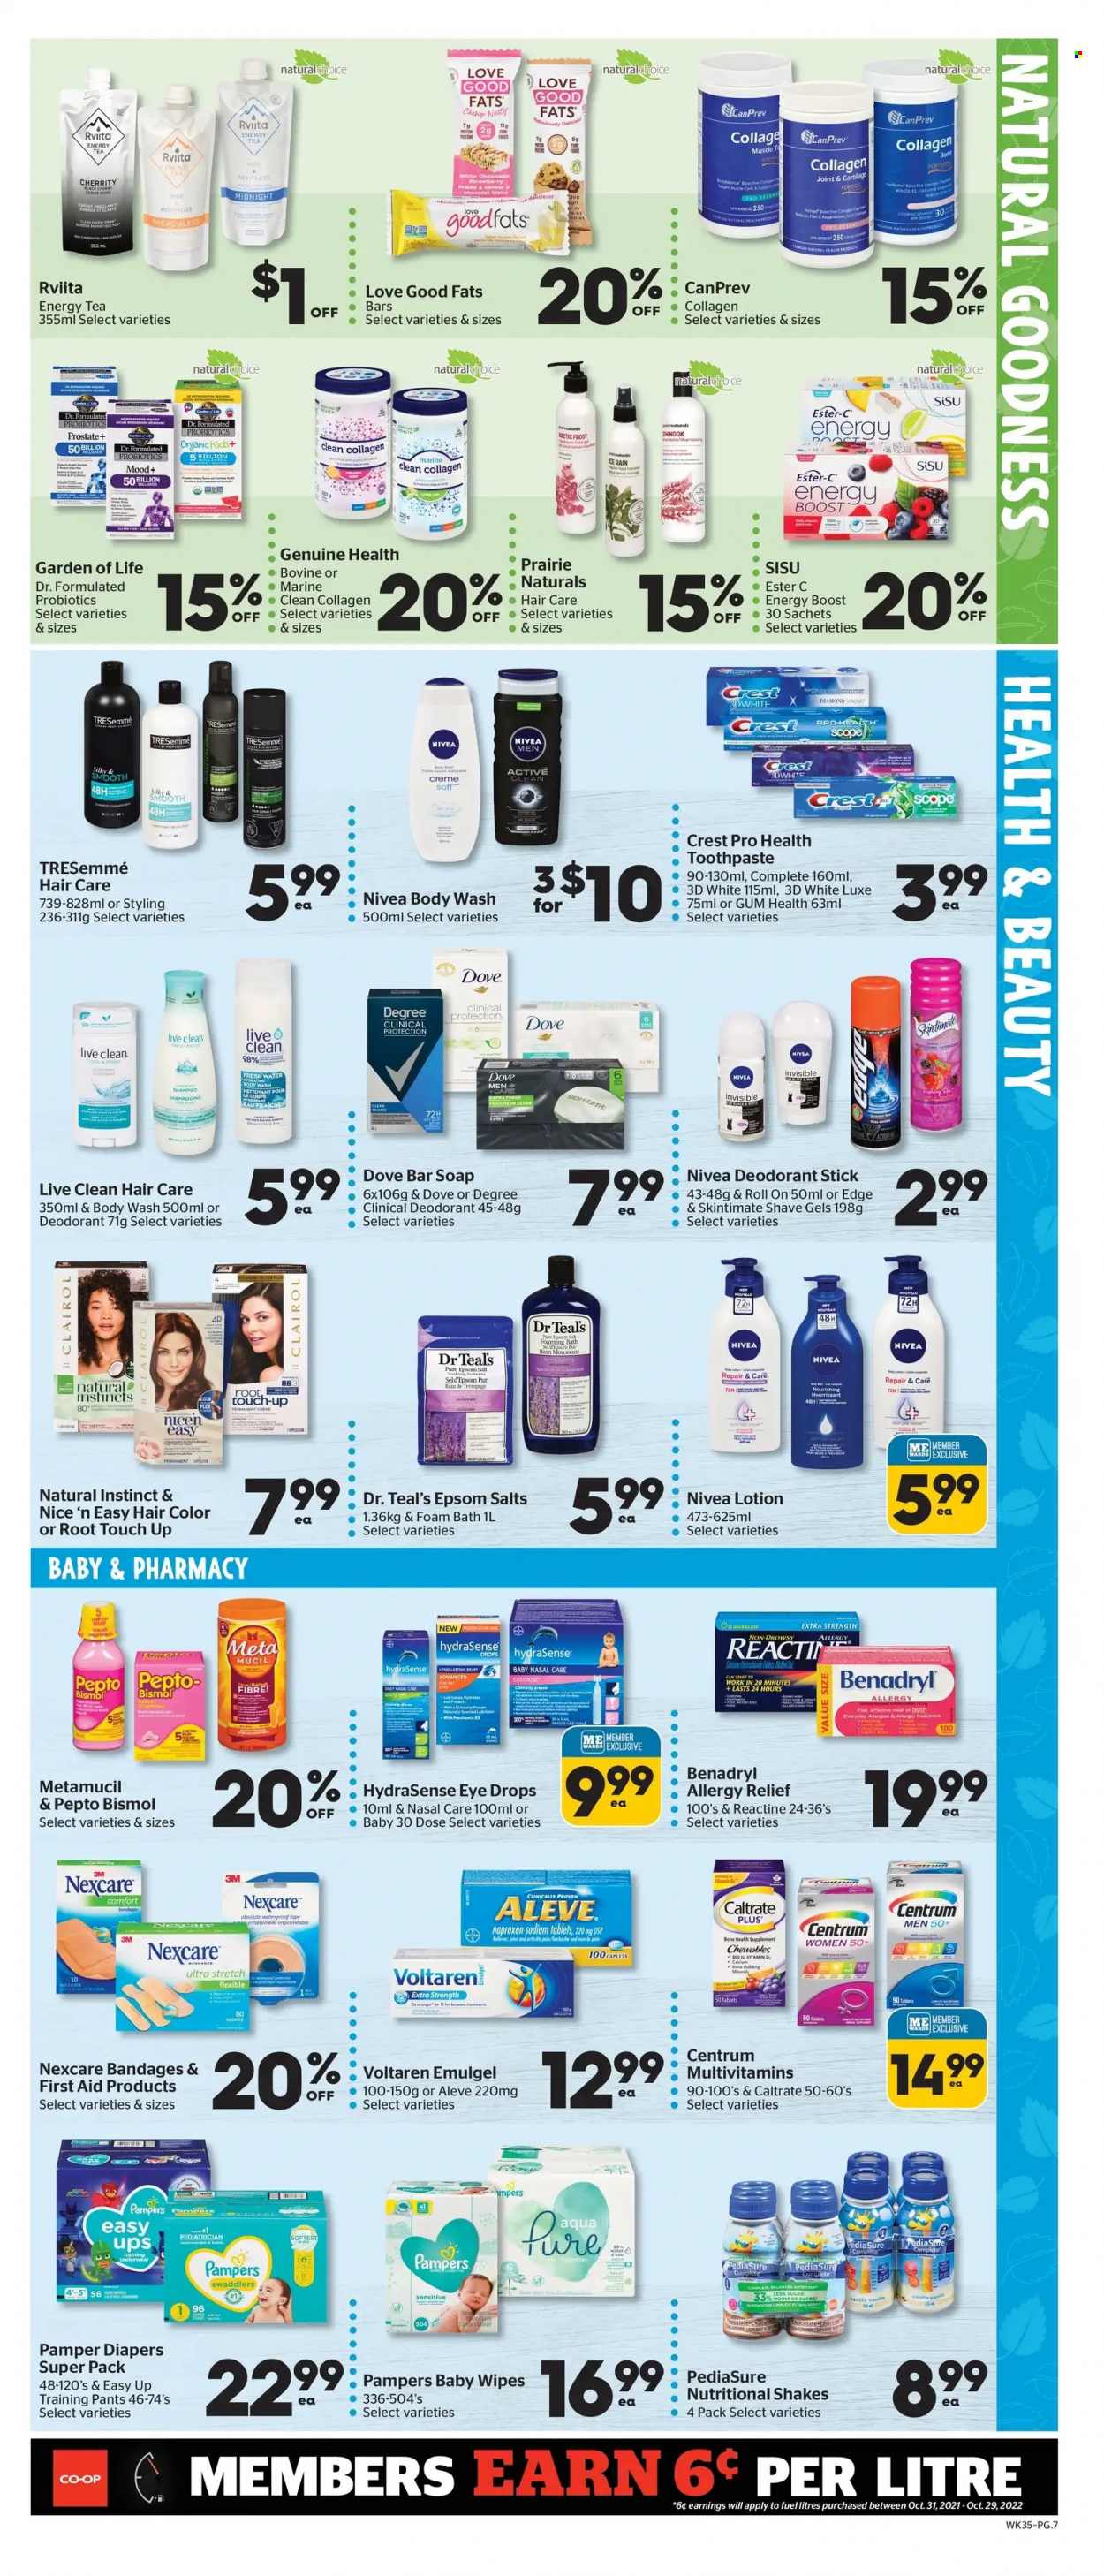 thumbnail - Calgary Co-op Flyer - June 30, 2022 - July 06, 2022 - Sales products - cherries, shake, white chocolate, Boost, tea, wipes, pants, baby wipes, nappies, baby pants, Nivea, body wash, bath foam, soap bar, soap, toothpaste, Crest, Clairol, TRESemmé, hair color, body lotion, Absolute, anti-perspirant, roll-on, Aleve, Ester-c, multivitamin, probiotics, eye drops, Centrum, Metamucil, allergy relief, health supplement, Dove, shampoo, Pampers, deodorant. Page 8.